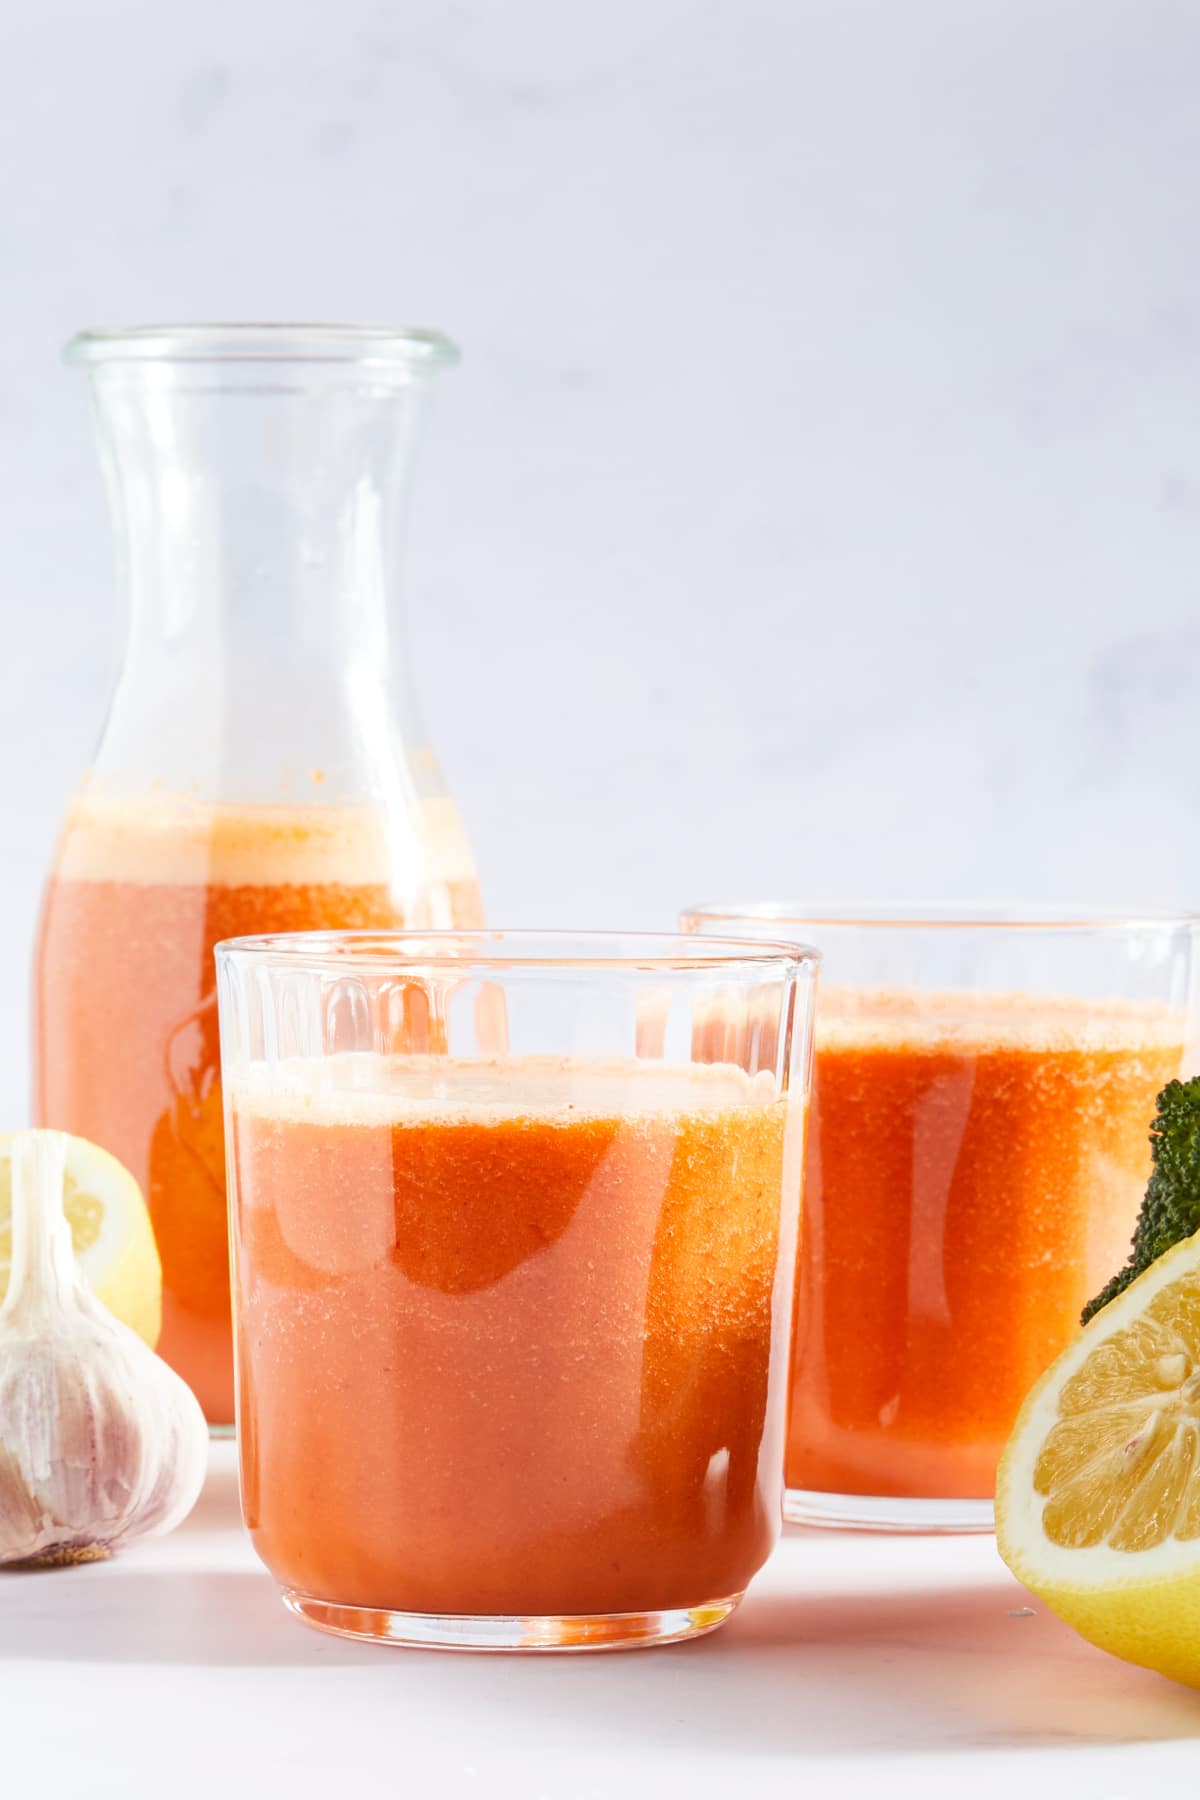 Side view of two glasses of bright orange juice and a larger bottle of juice. Two lemon halves and a garlic bulb sit next to the juice.